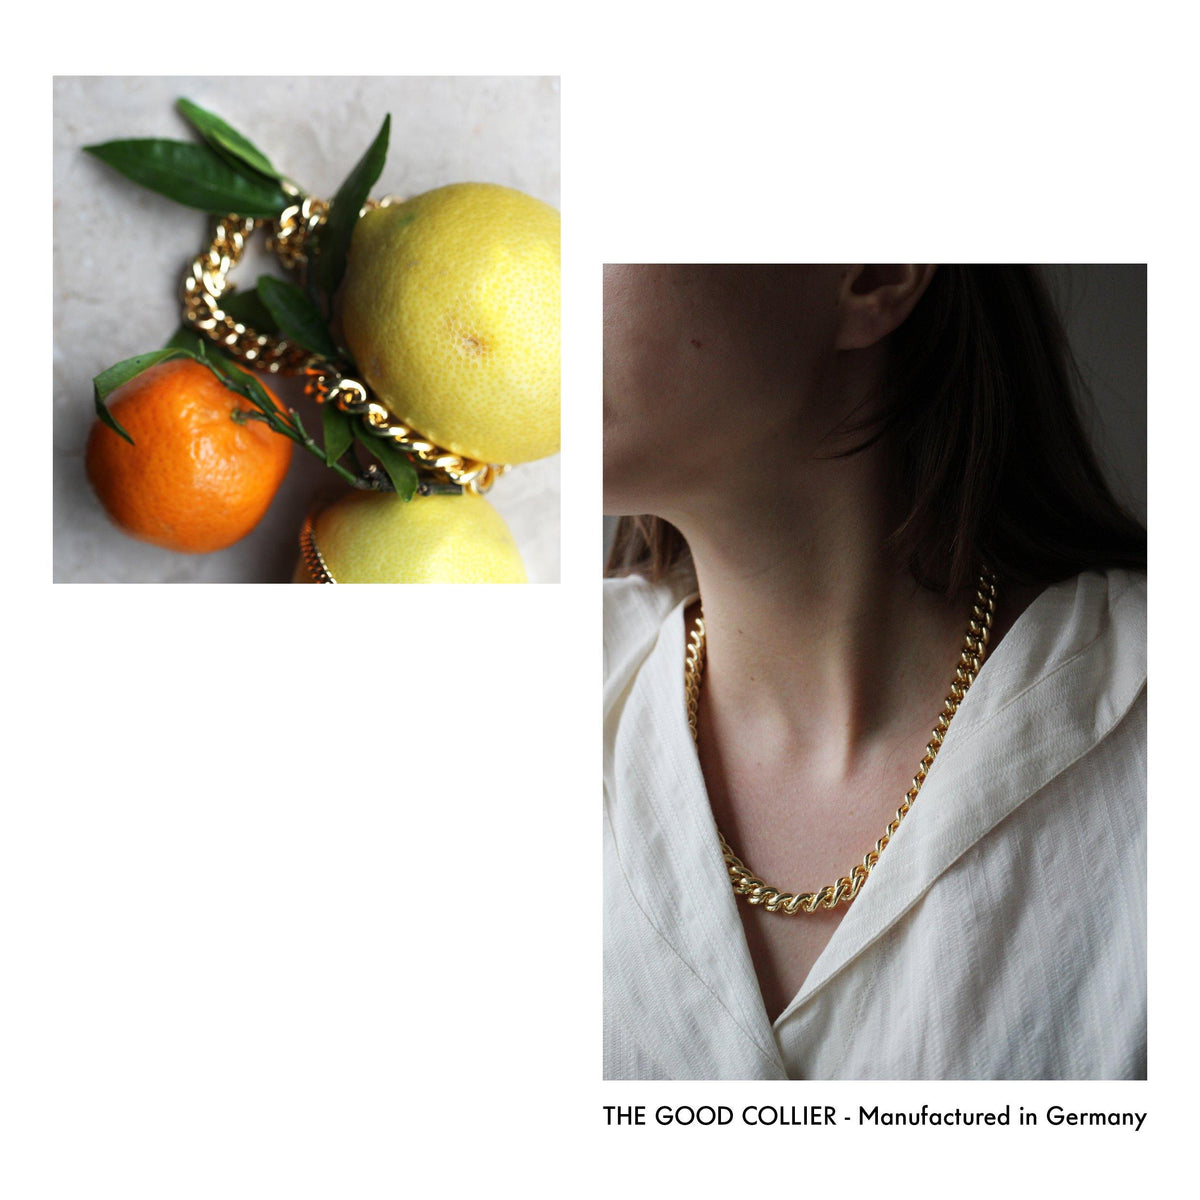 THE GOOD COLLIER